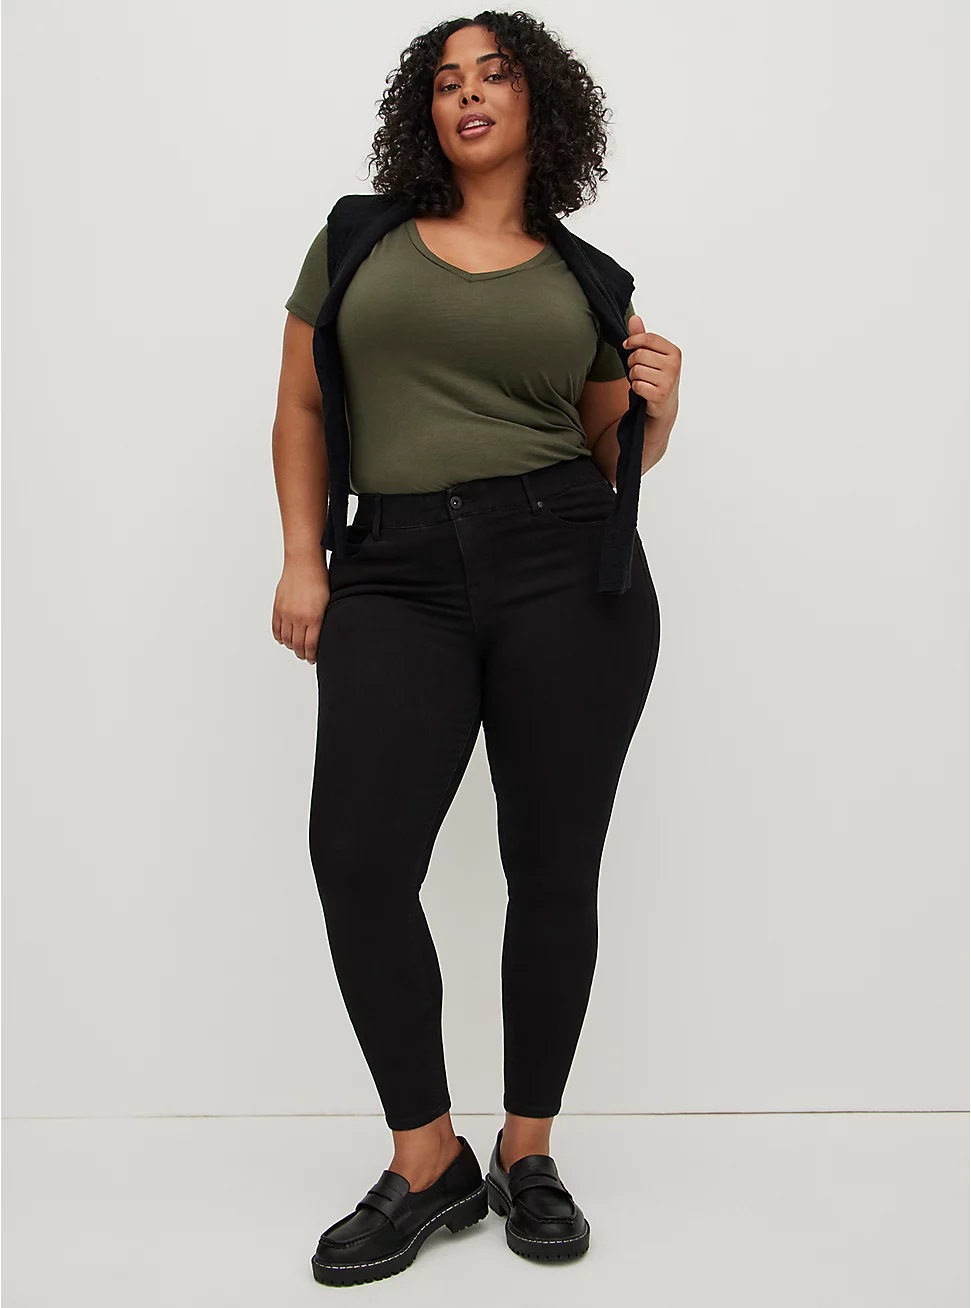 REAL Plus Size Clothes & Models